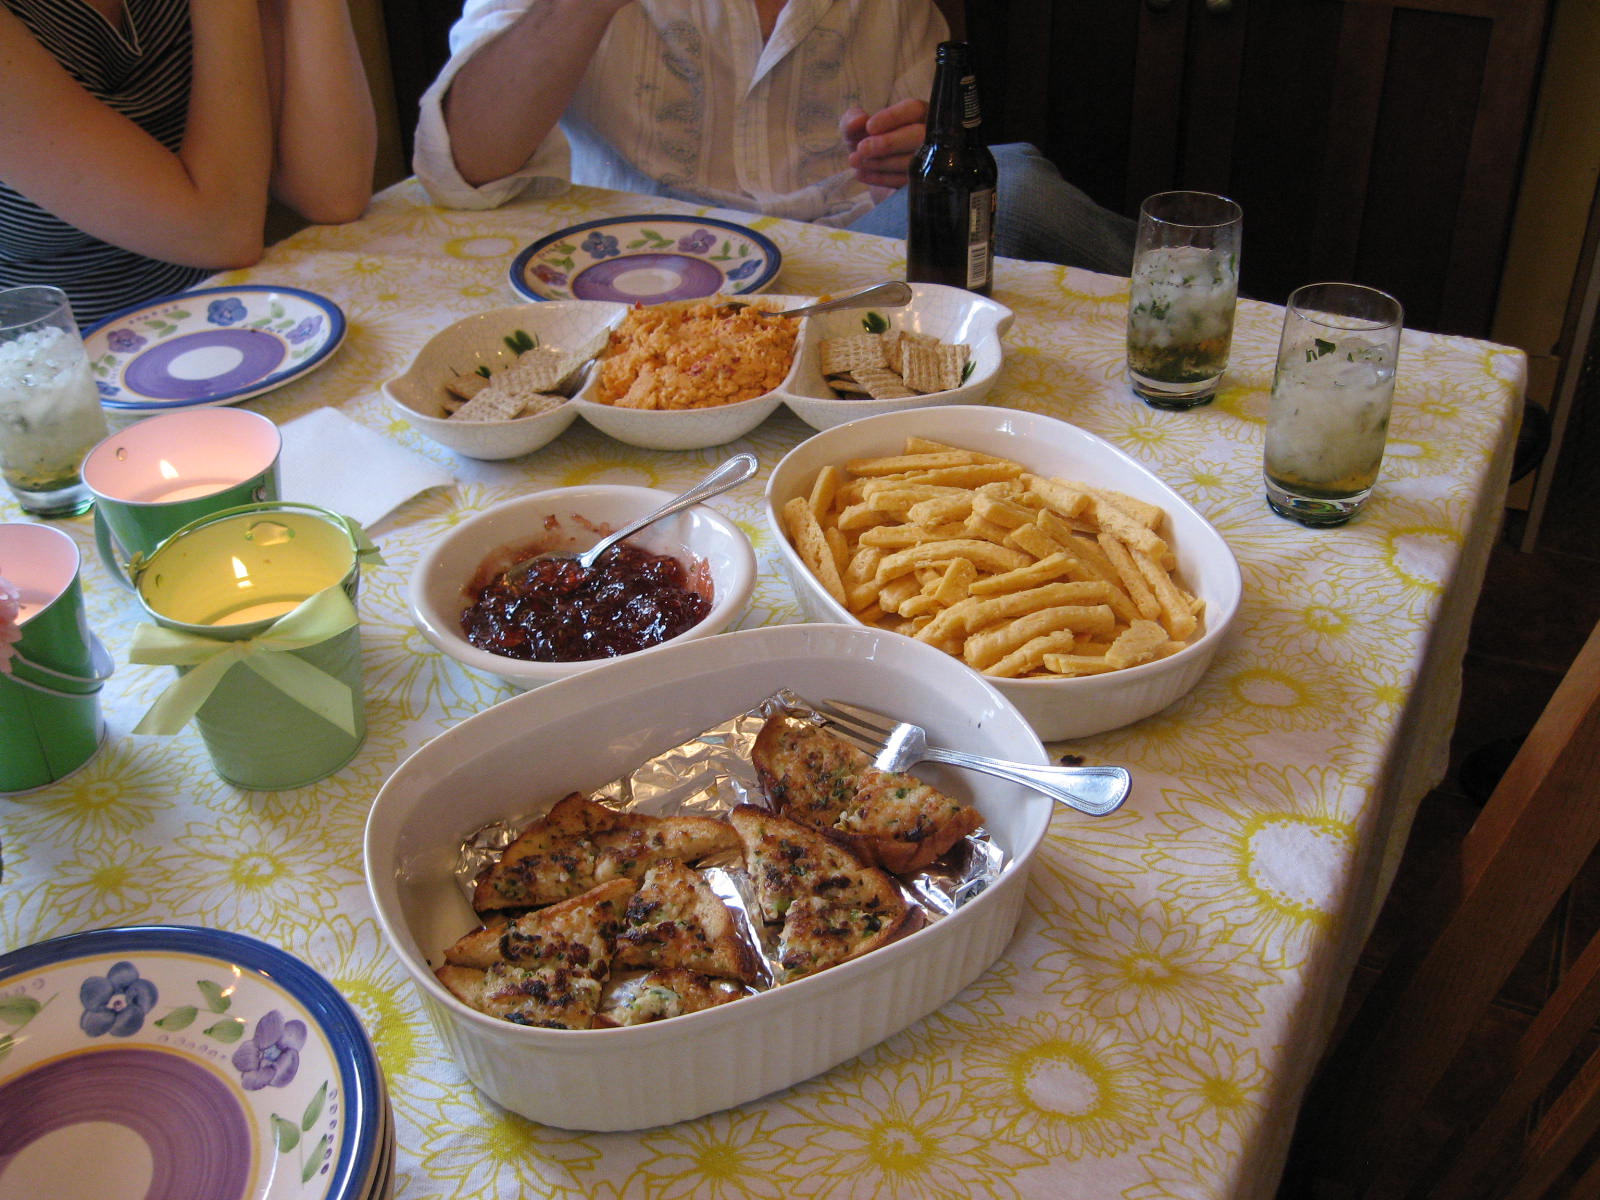 the table is covered with dishes that have different foods in them